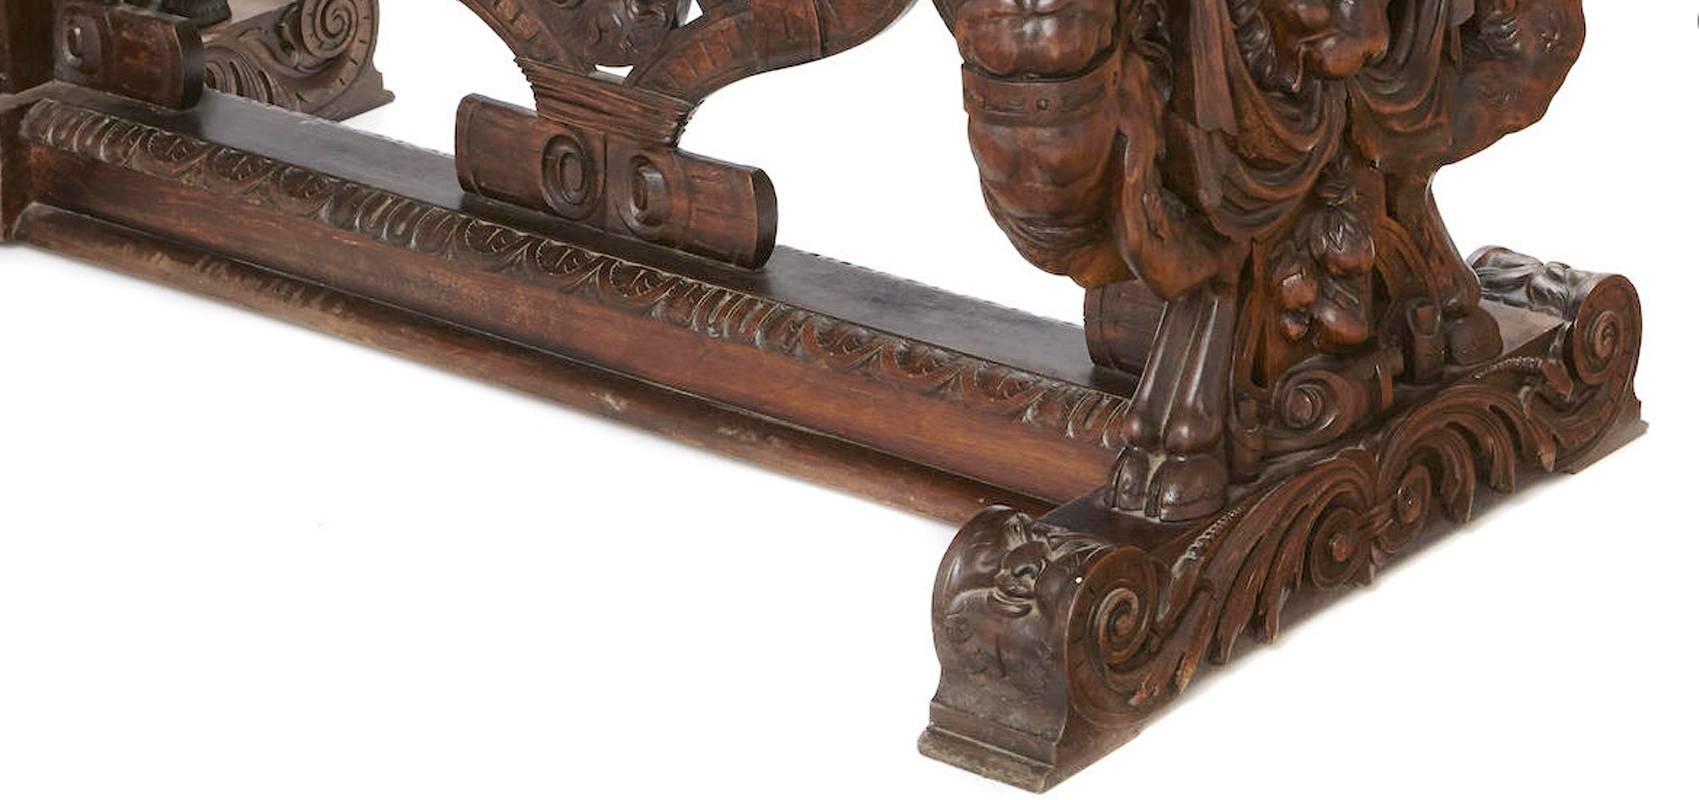 Hand-Carved 19th Century Continental Renaissance Style Walnut Library Table